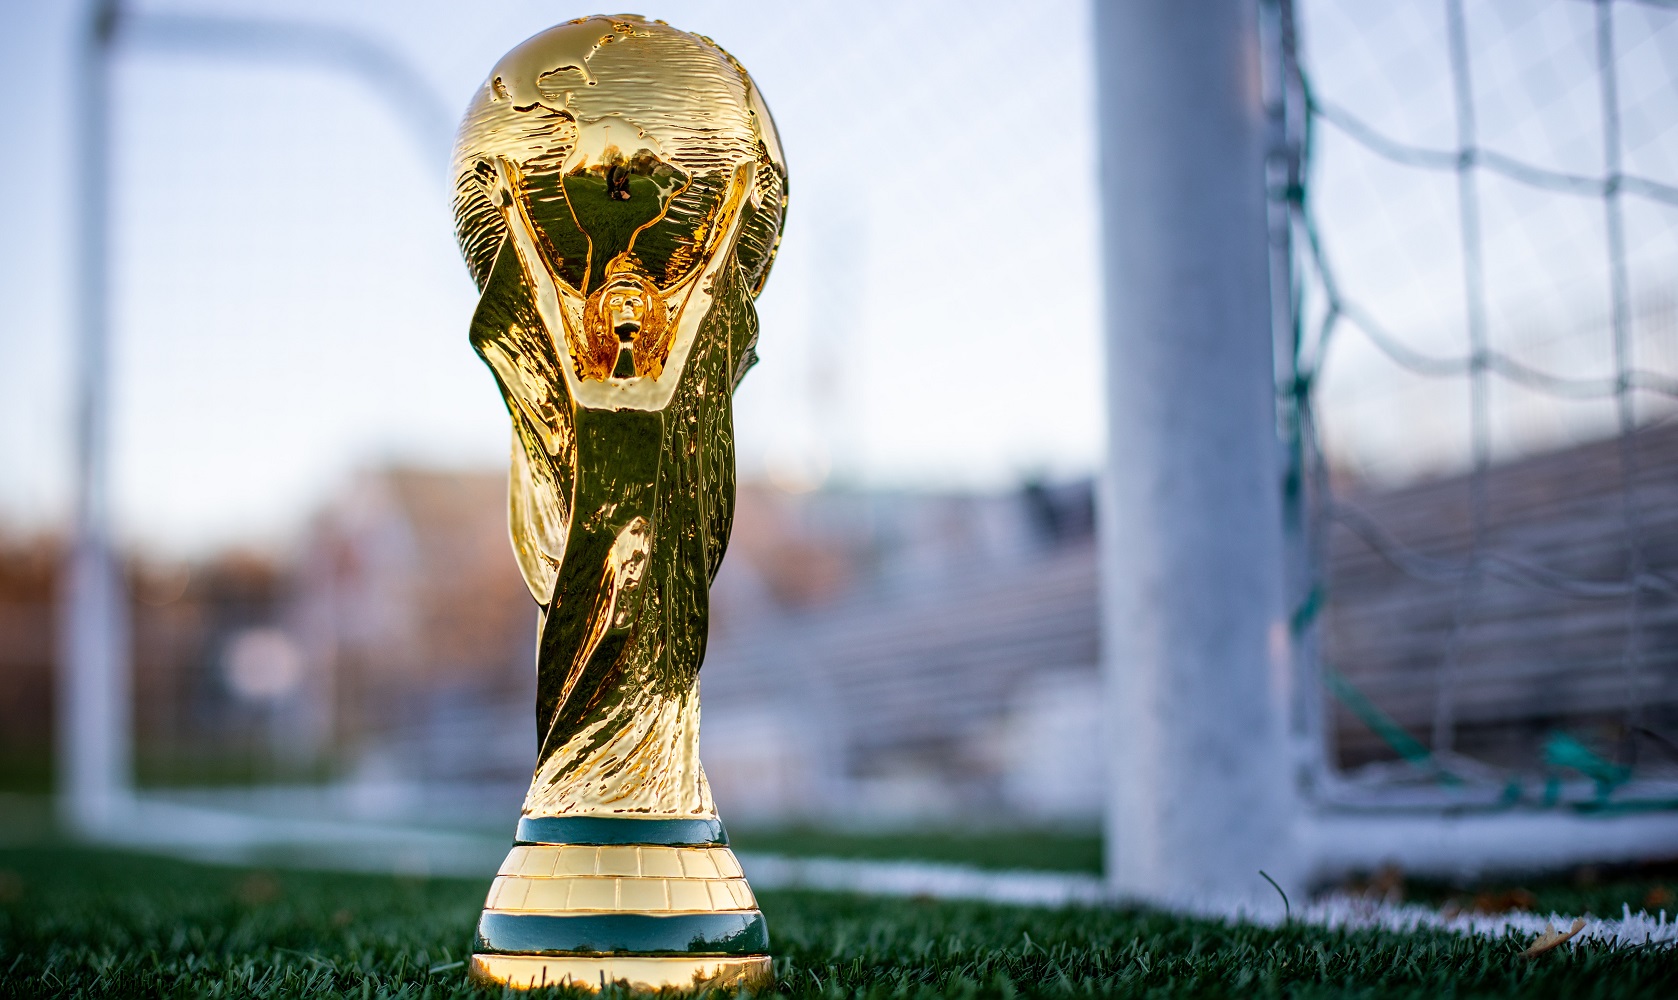 Google & Euromonitor Share Insights on This Year’s World Cup Visitors